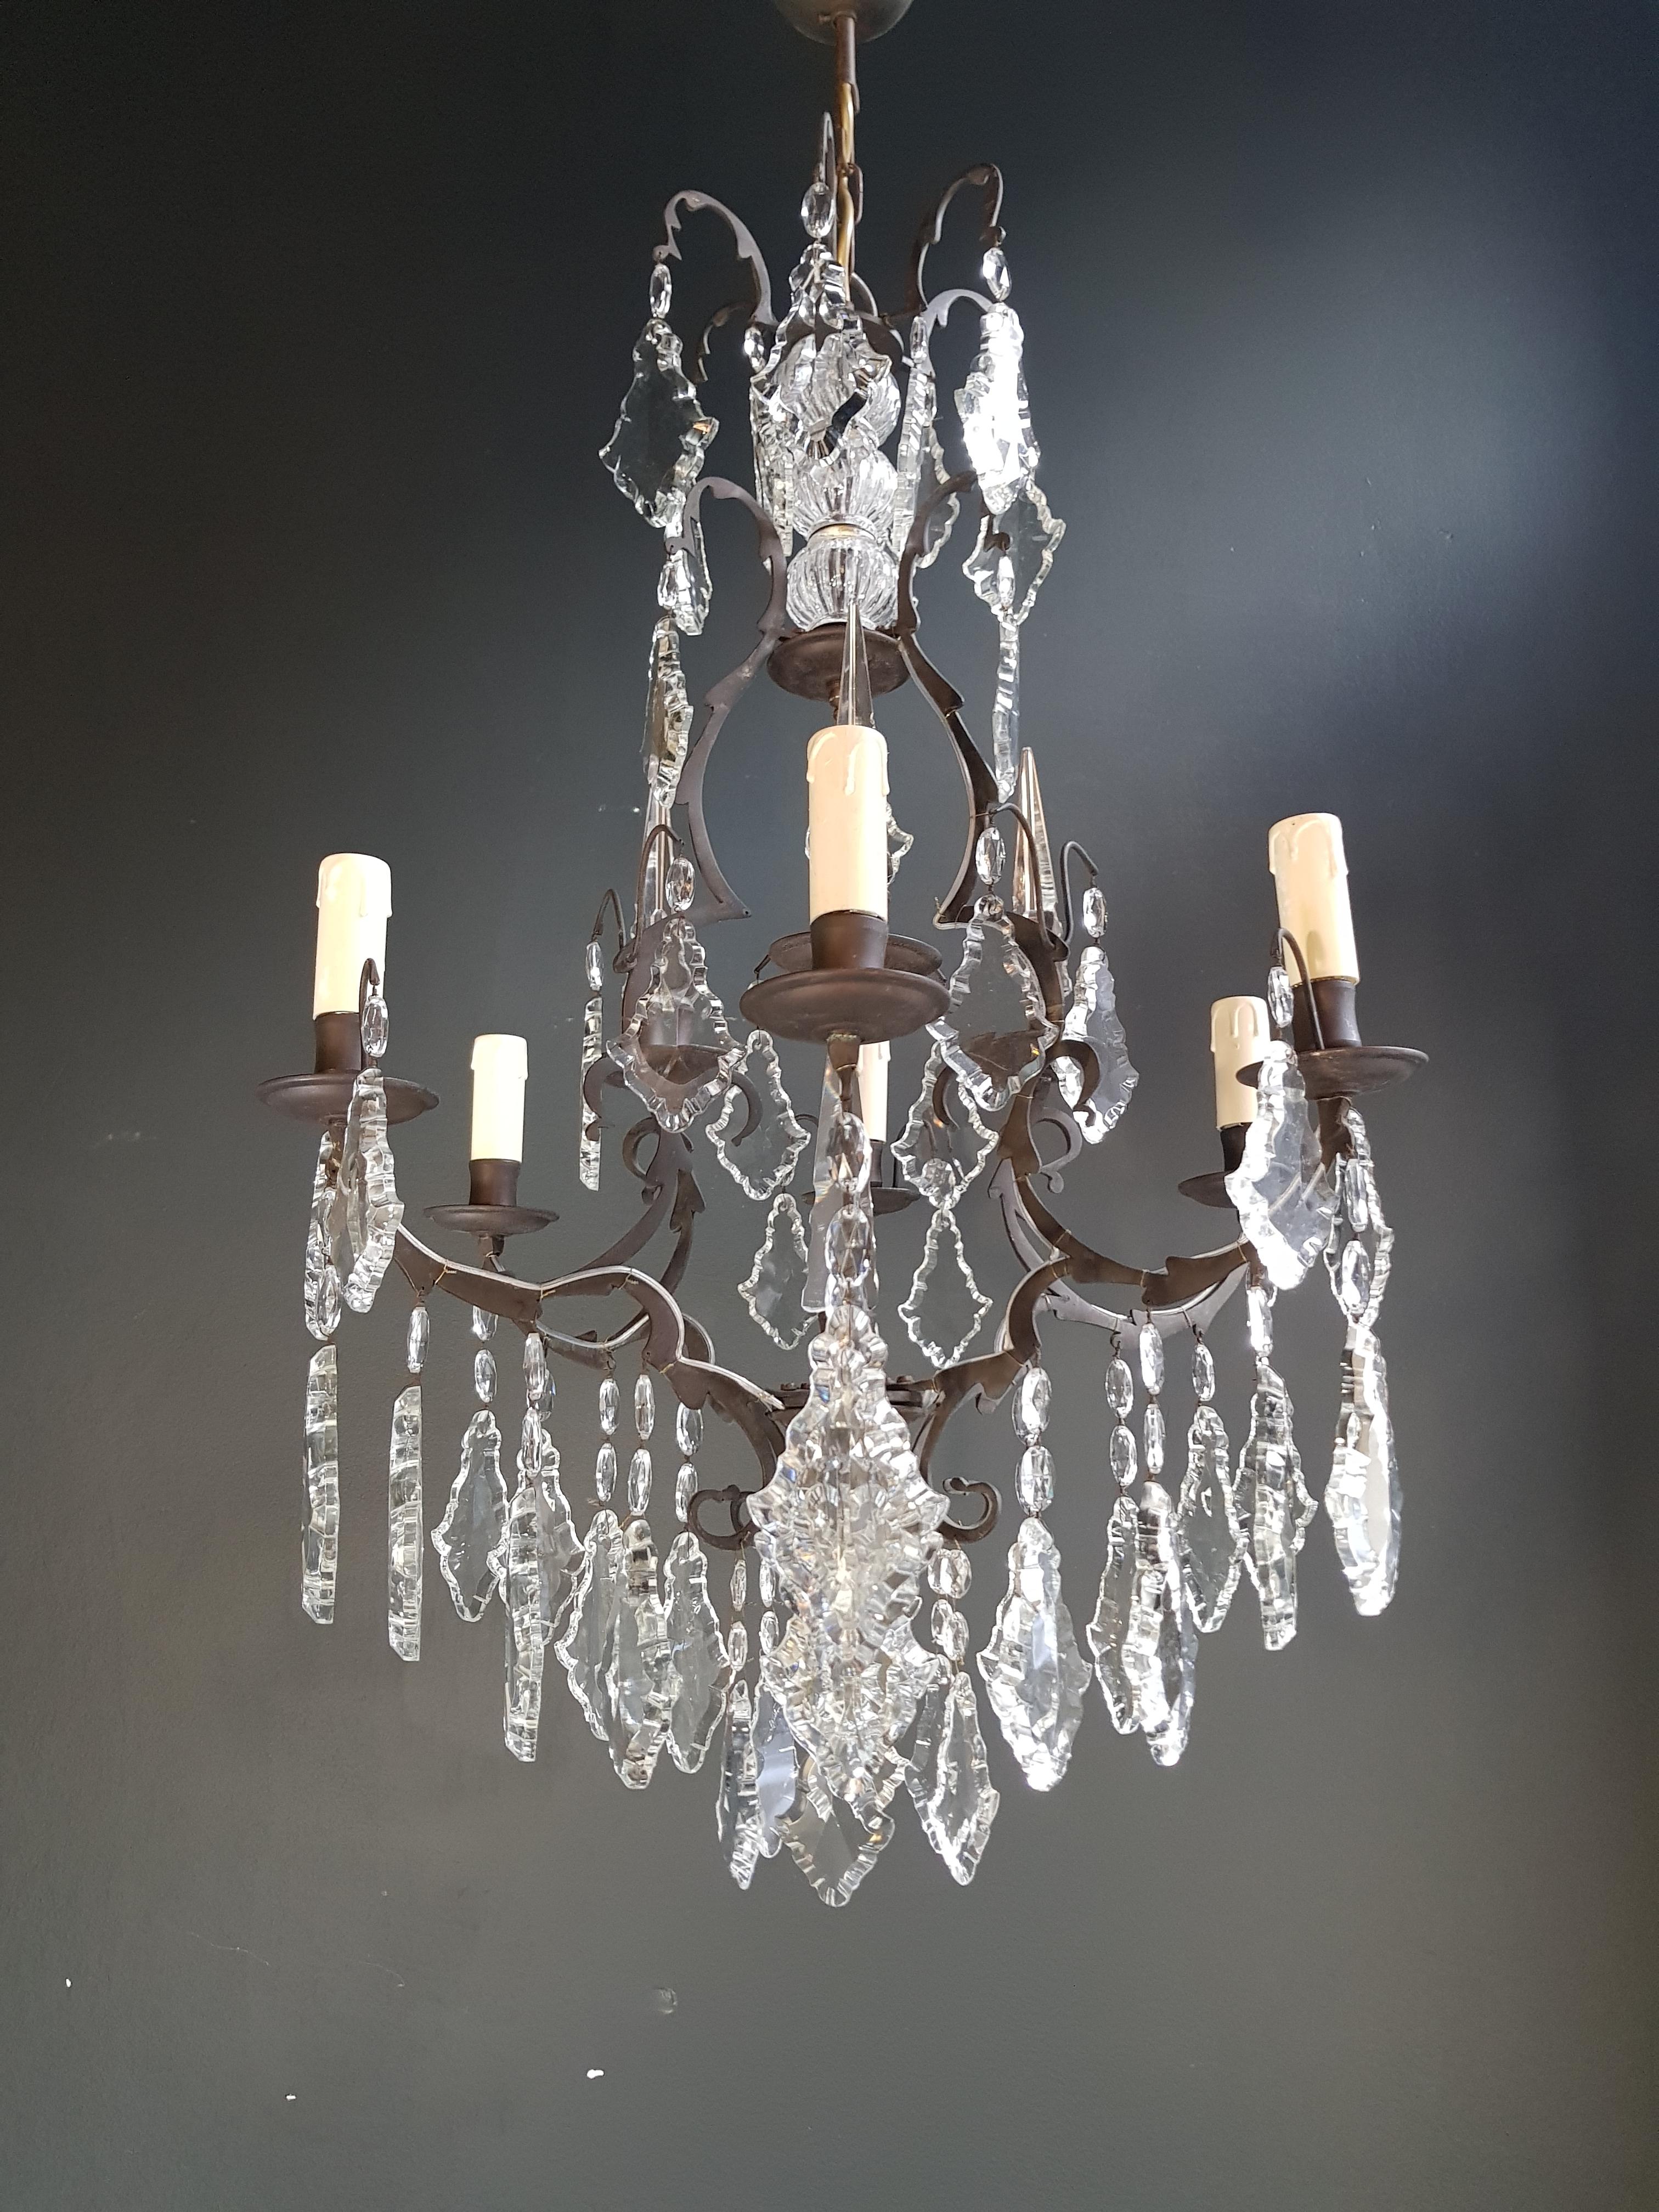 French crystal chandelier antique ceiling lamp lustre Art Nouveau lamp.

Old chandelier with love and professionally restored in Berlin. electrical wiring works in the US.
Re-wired and ready to hang.
New electricity! New cable! New sockets!
Total